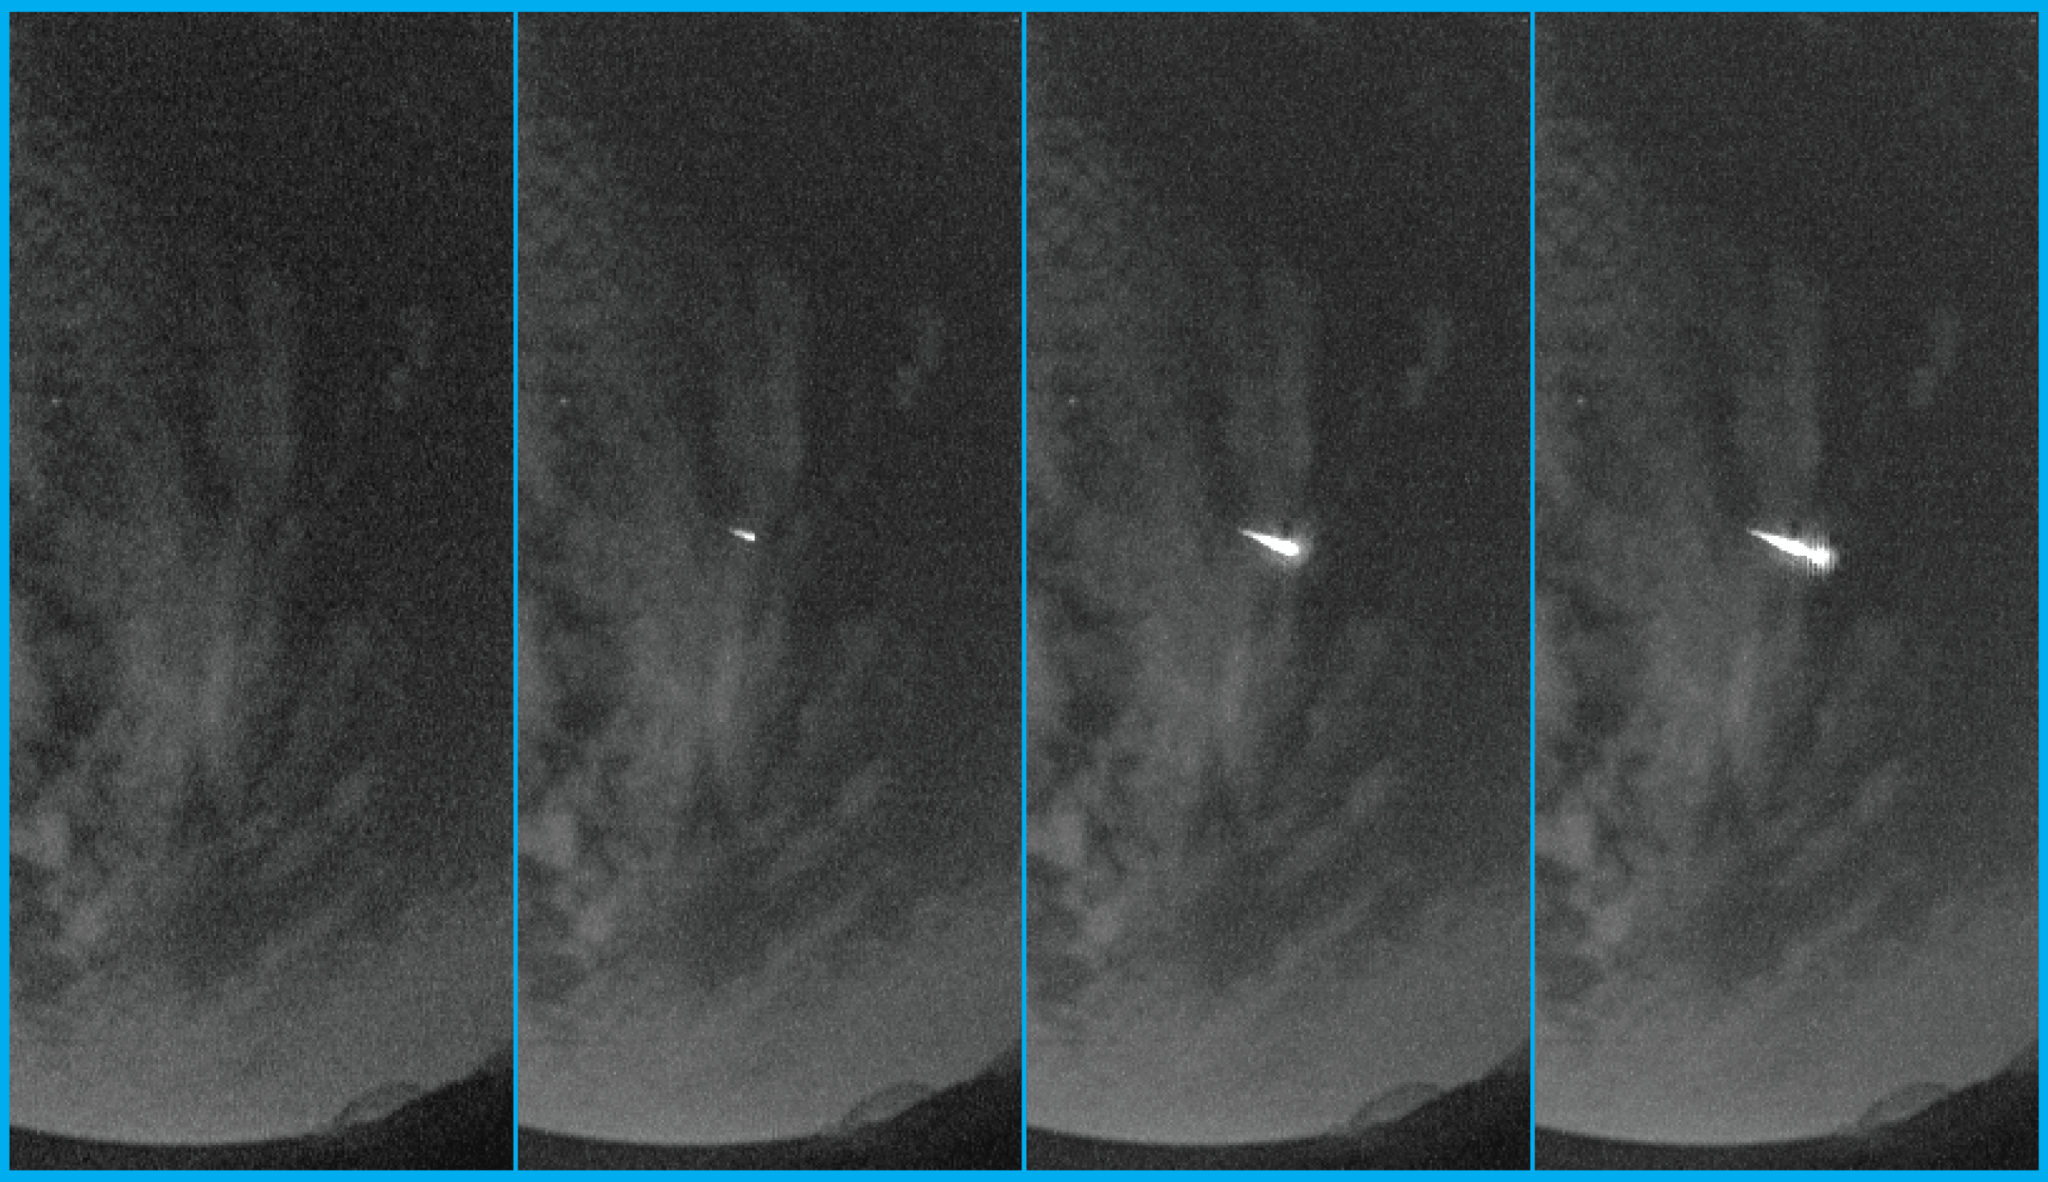 A series of images from a 2014 Lyrid meteor shower.